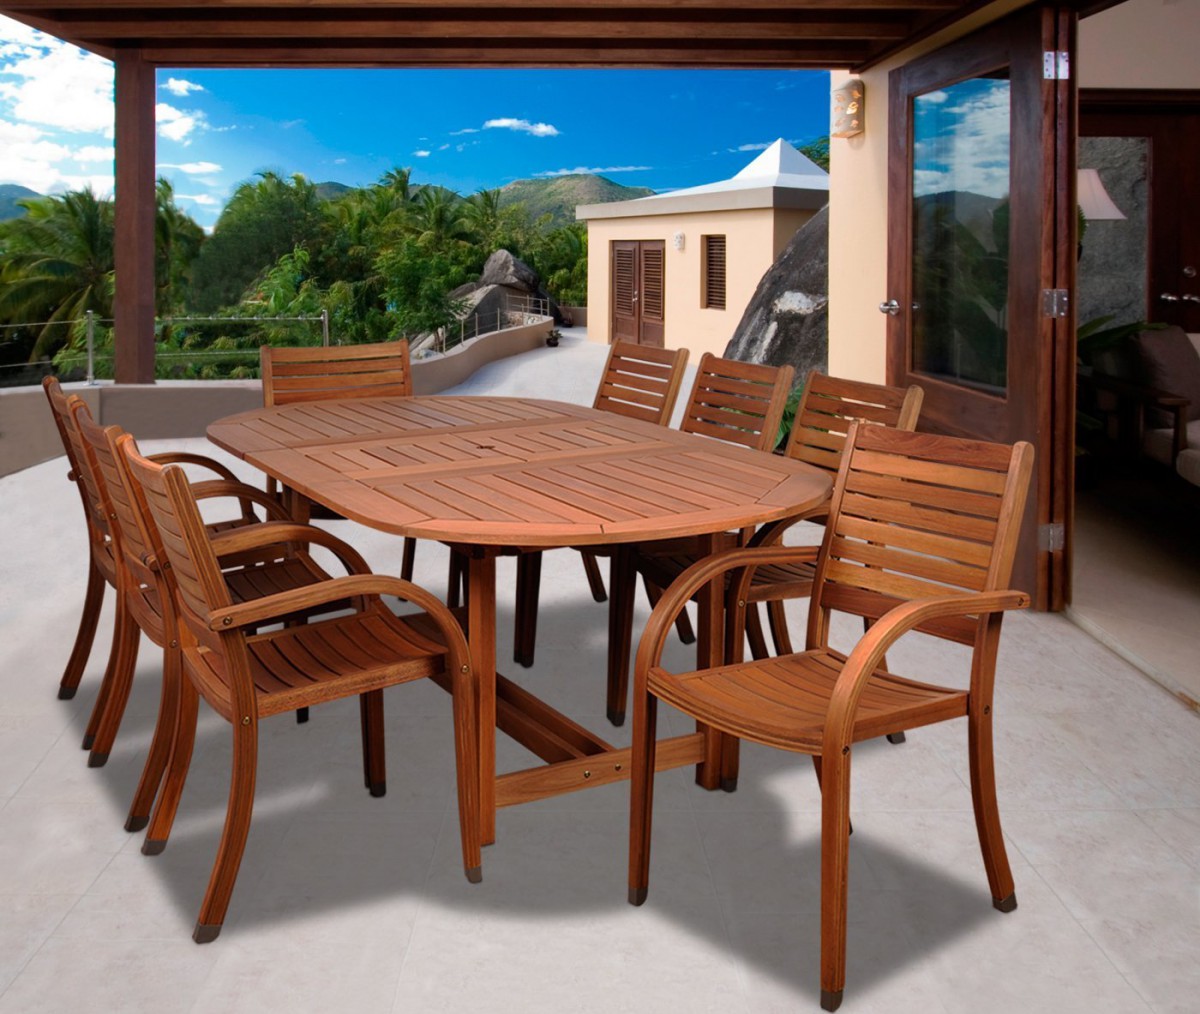 Amazonia Arizona 9 Piece Wood Outdoor Dining Set with 93″ Oval Table and 8 Stackable Chairs